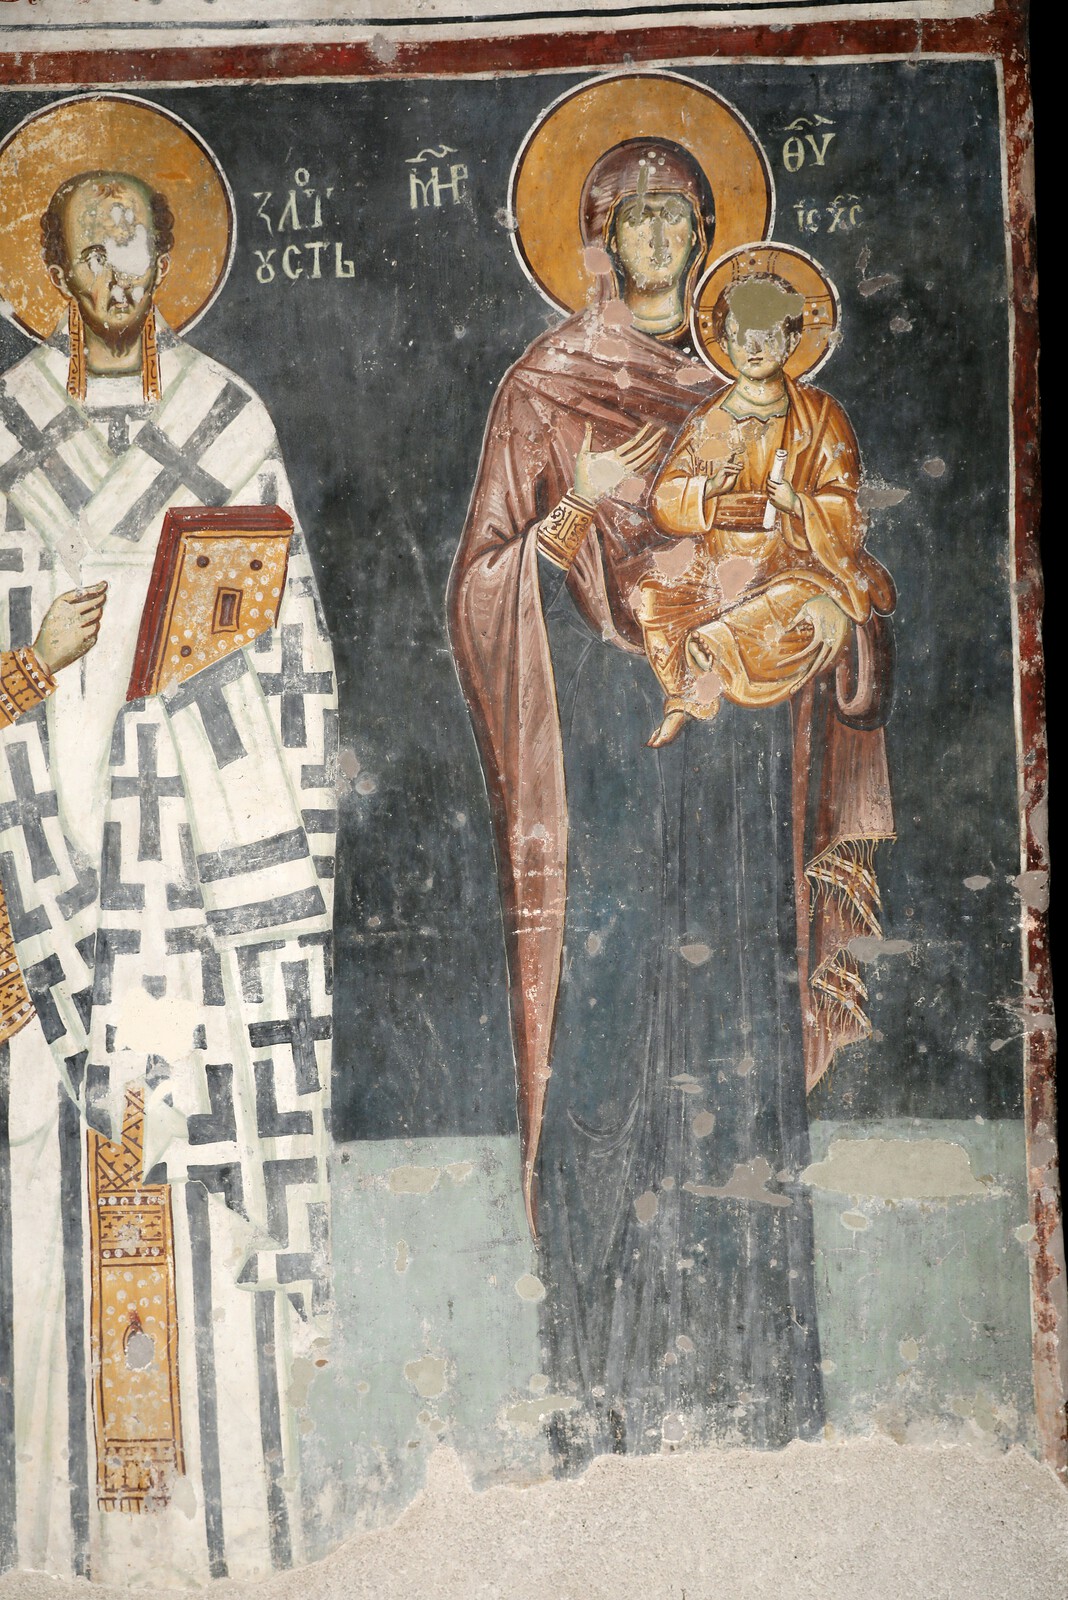 St. John the Chrysostom and Holy Virgin with the infant Christ